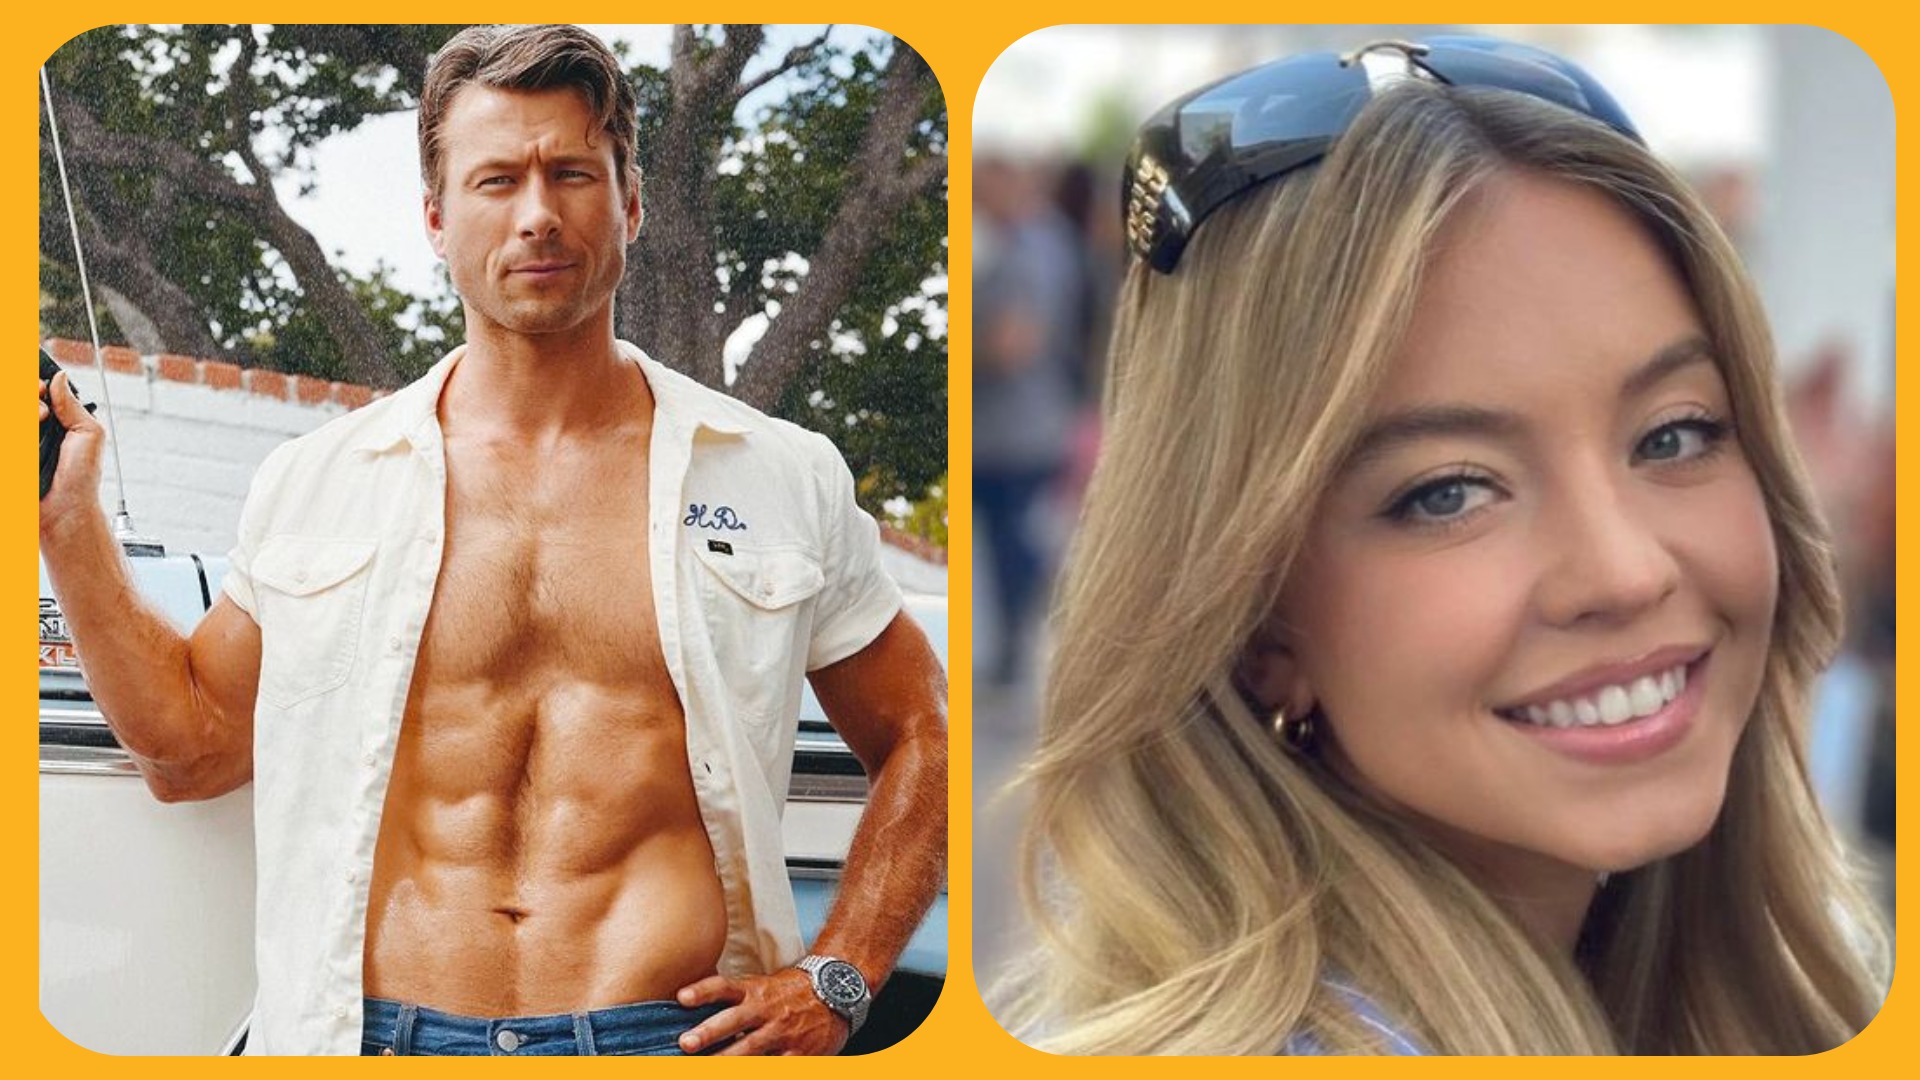 Sydney Sweeney says dating rumors were 'hard' on 'Anyone But You' co-star Glen Powell